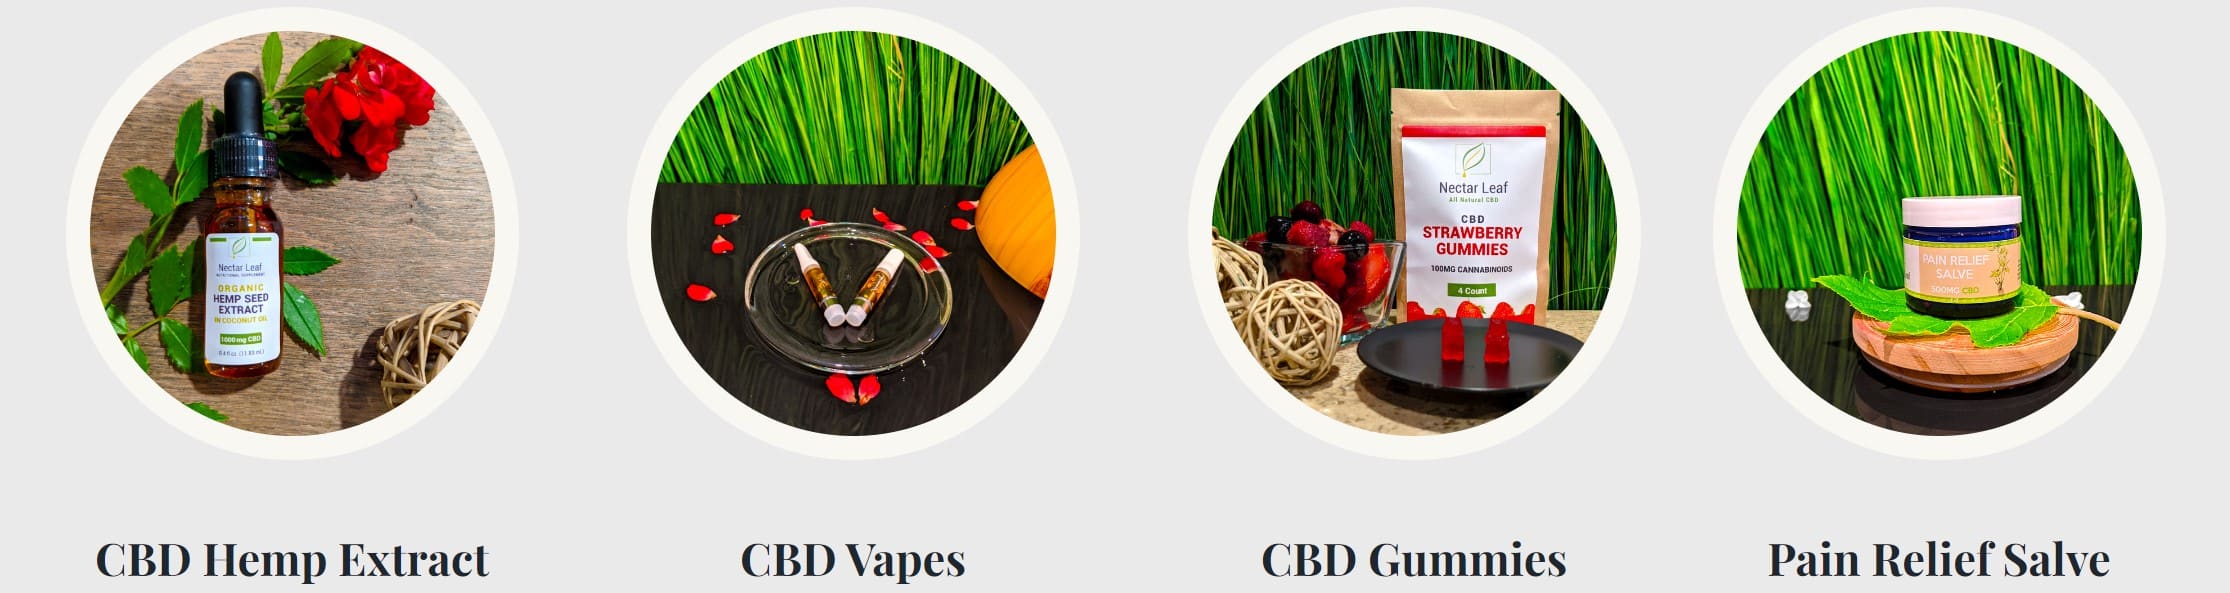 image of nectar leaf therapeutics cbd products and services